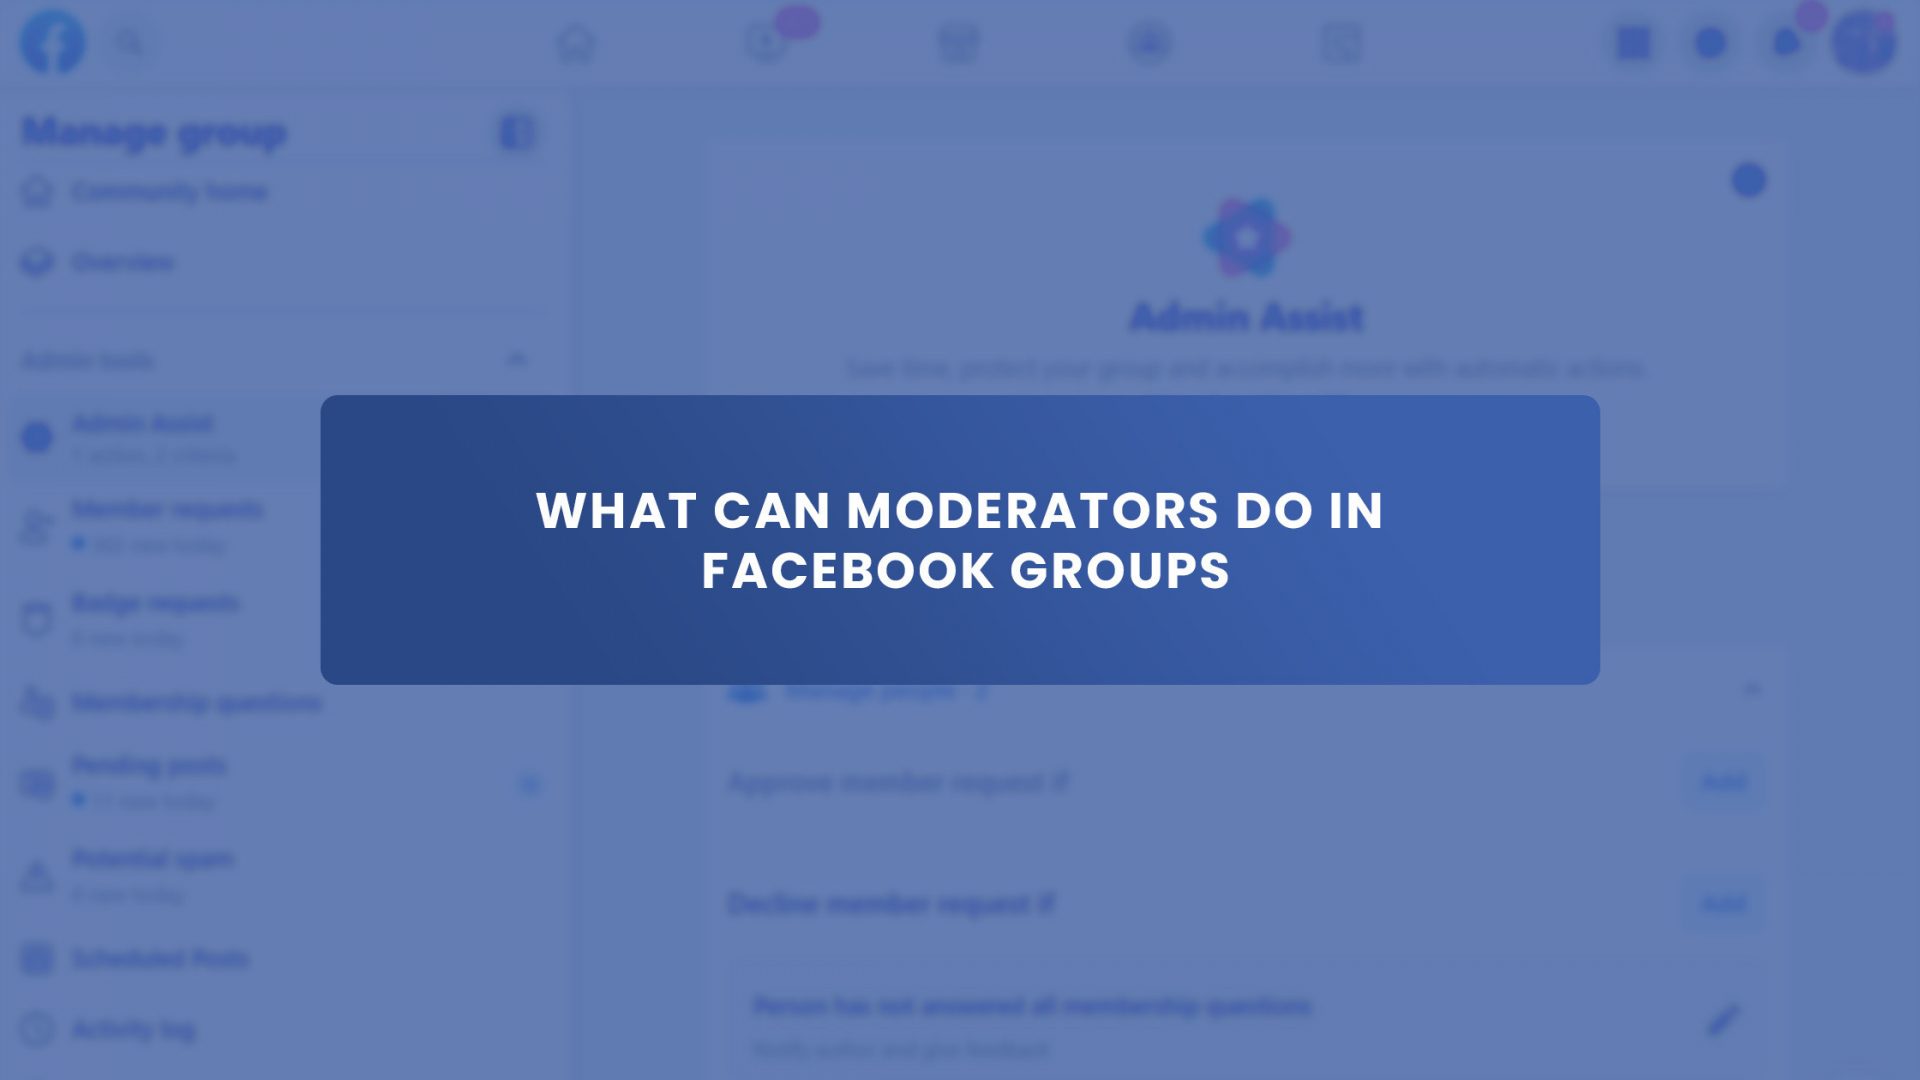 What can moderators do in Facebook groups